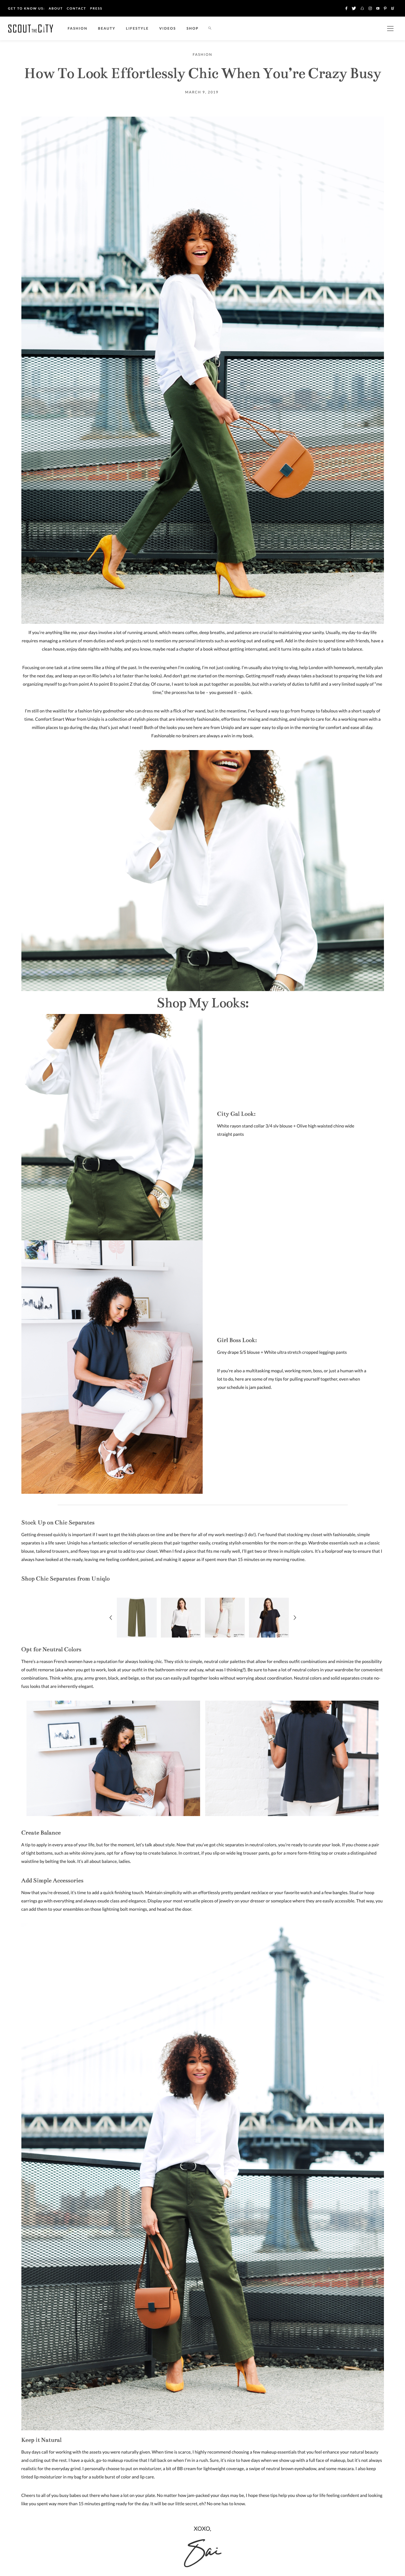 screencapture-scoutthecity-2019-03-how-to-look-effortlessly-chic-when-youre-crazy-busy-2019-06-20-19_31_06.png